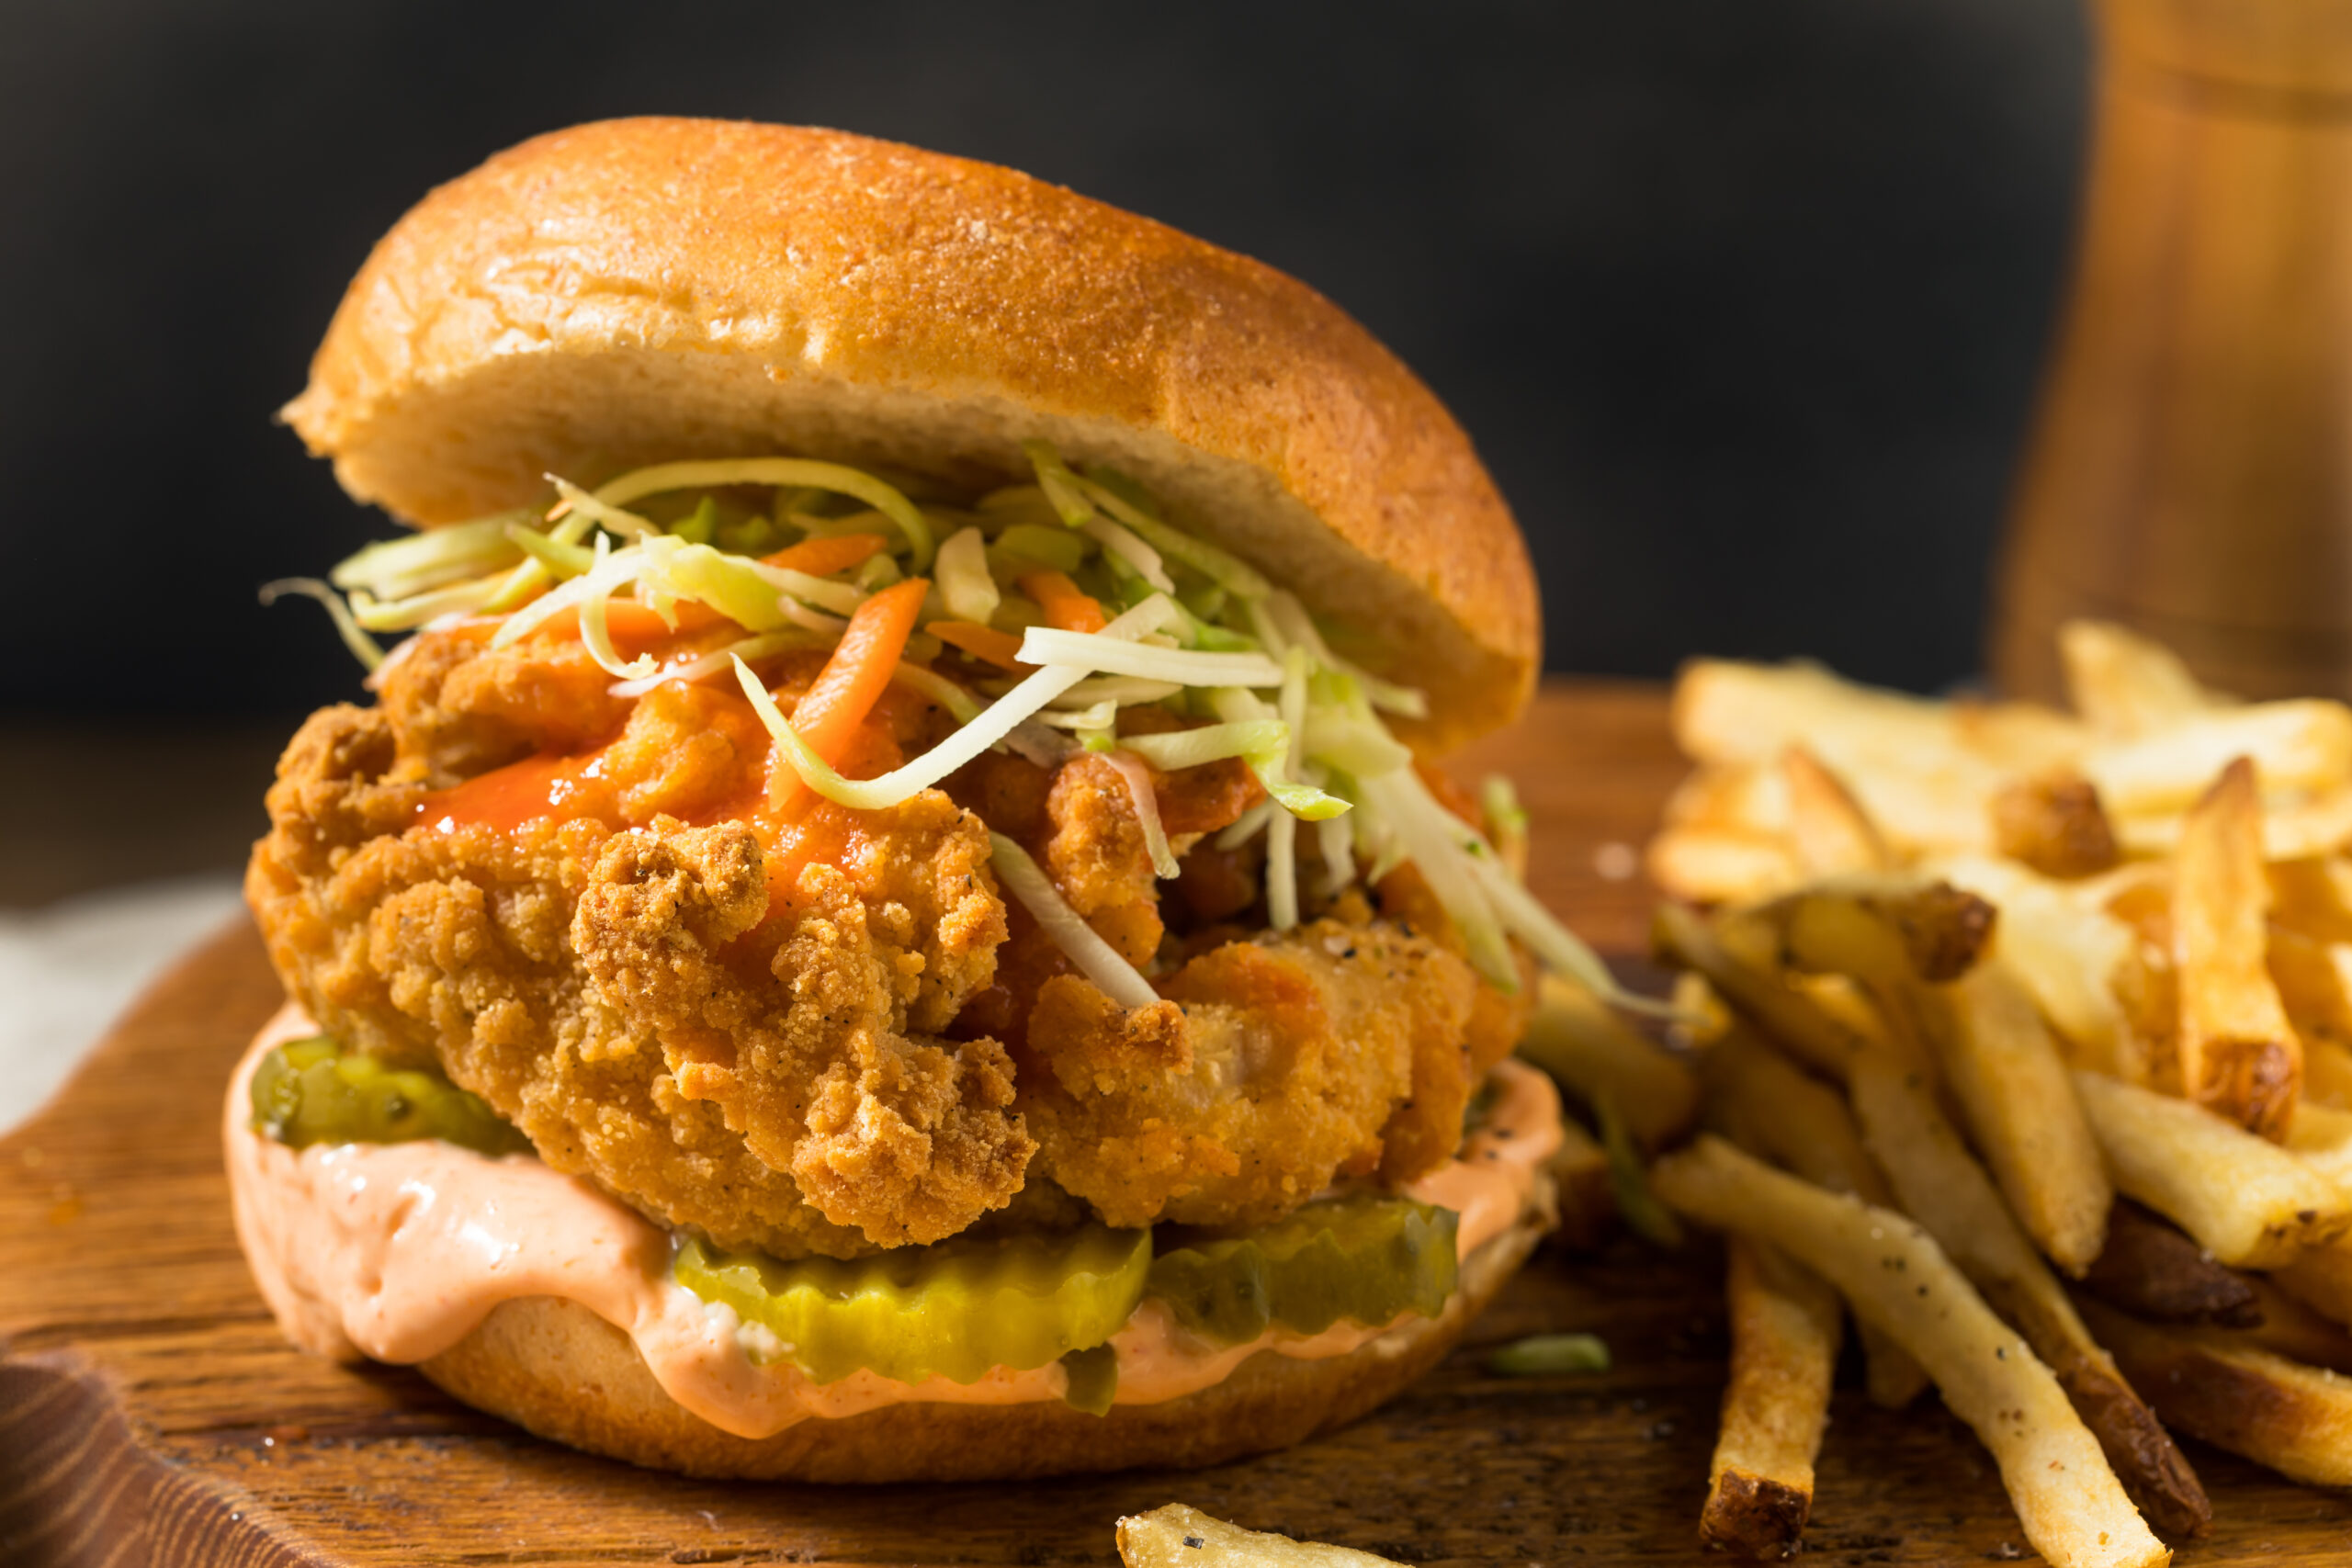 Homemade Spicy Fried Chicken Sandwich with French Fries